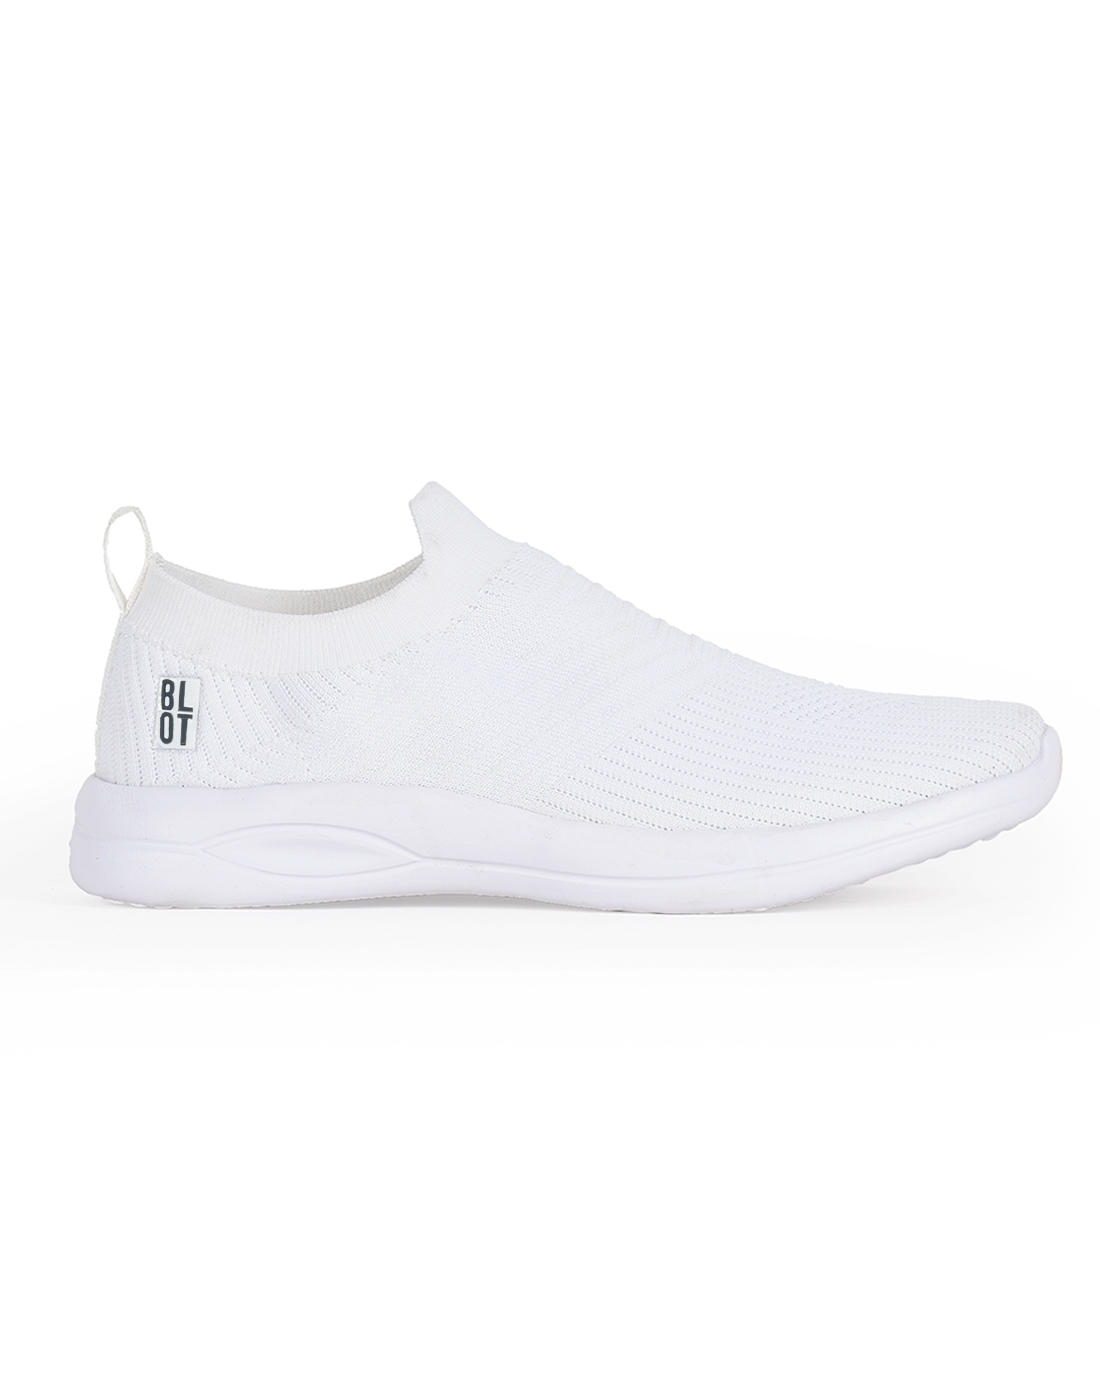 PARAGON Mens Solid White Sports Sneakers | Stylish, Comfortable and lightweight slip-on Sneakers for Men